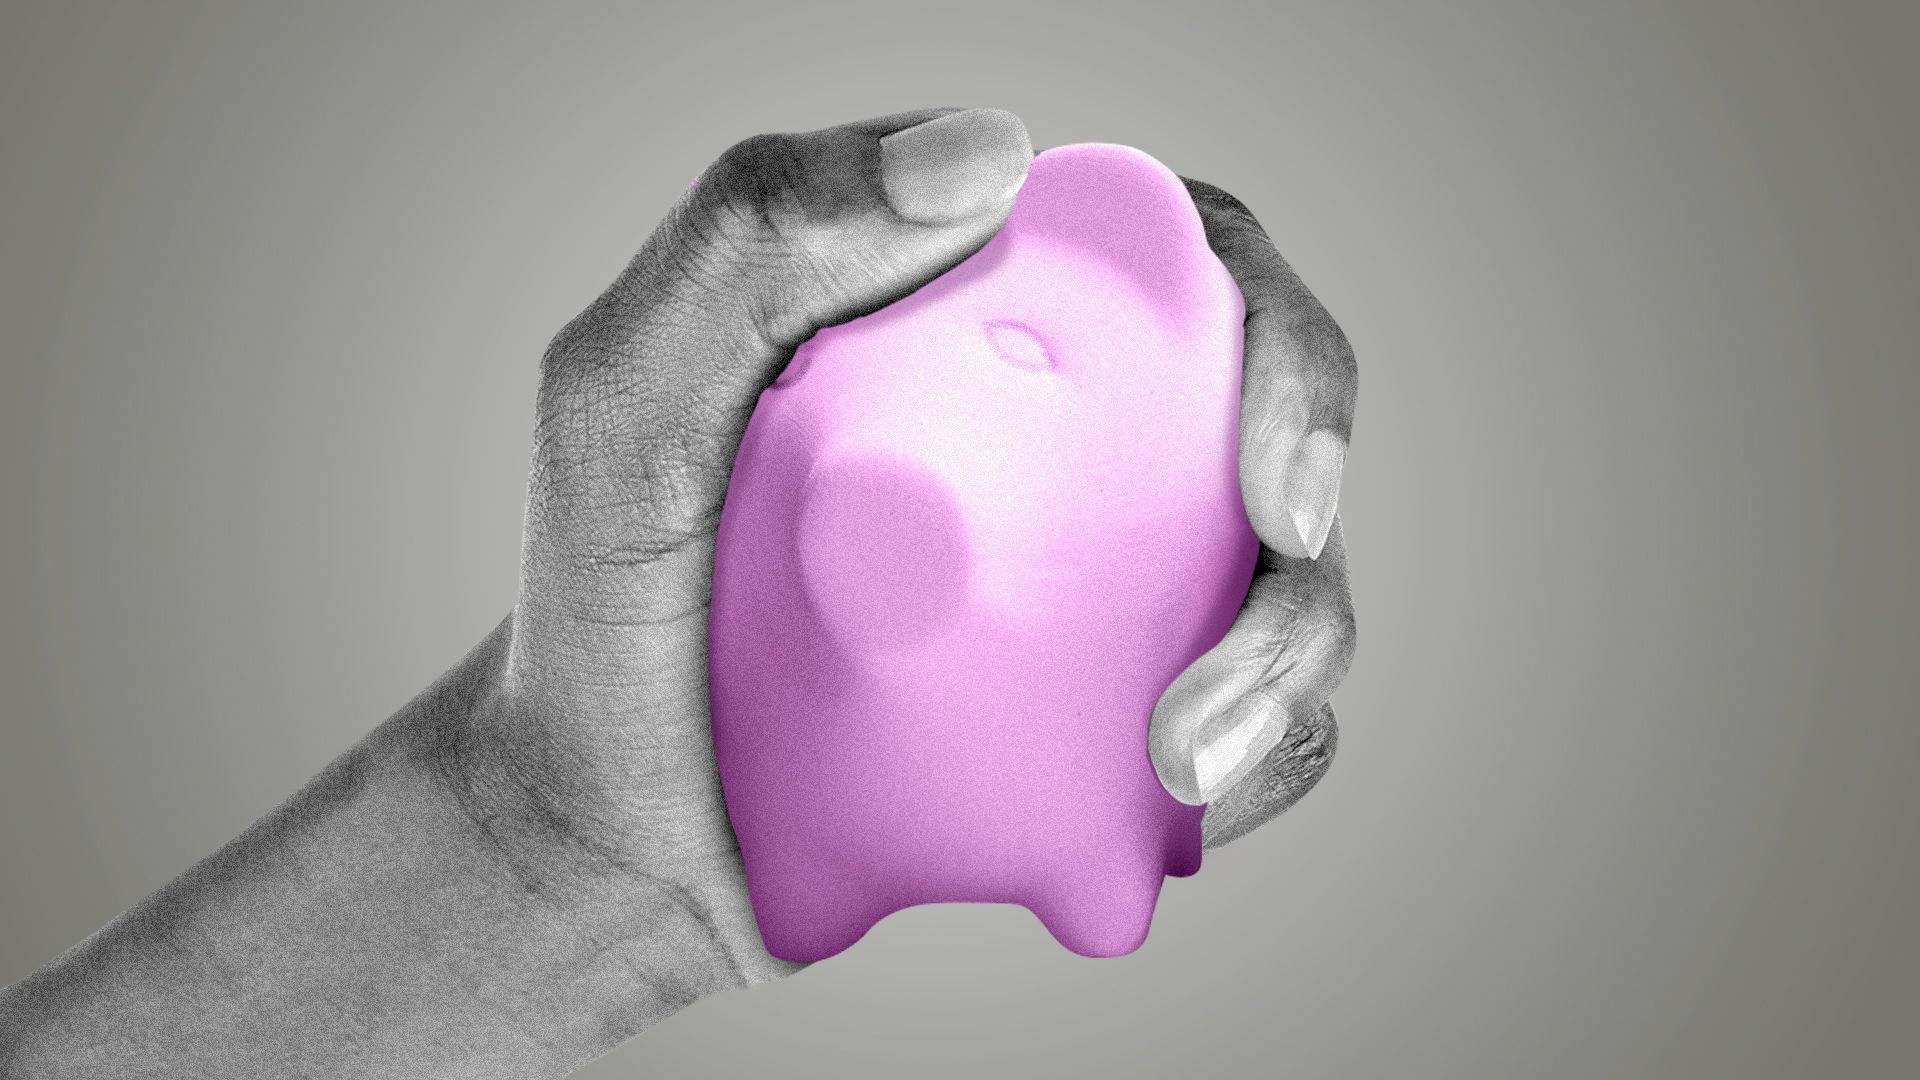 Illustration of a hand squeezing a piggy bank. 